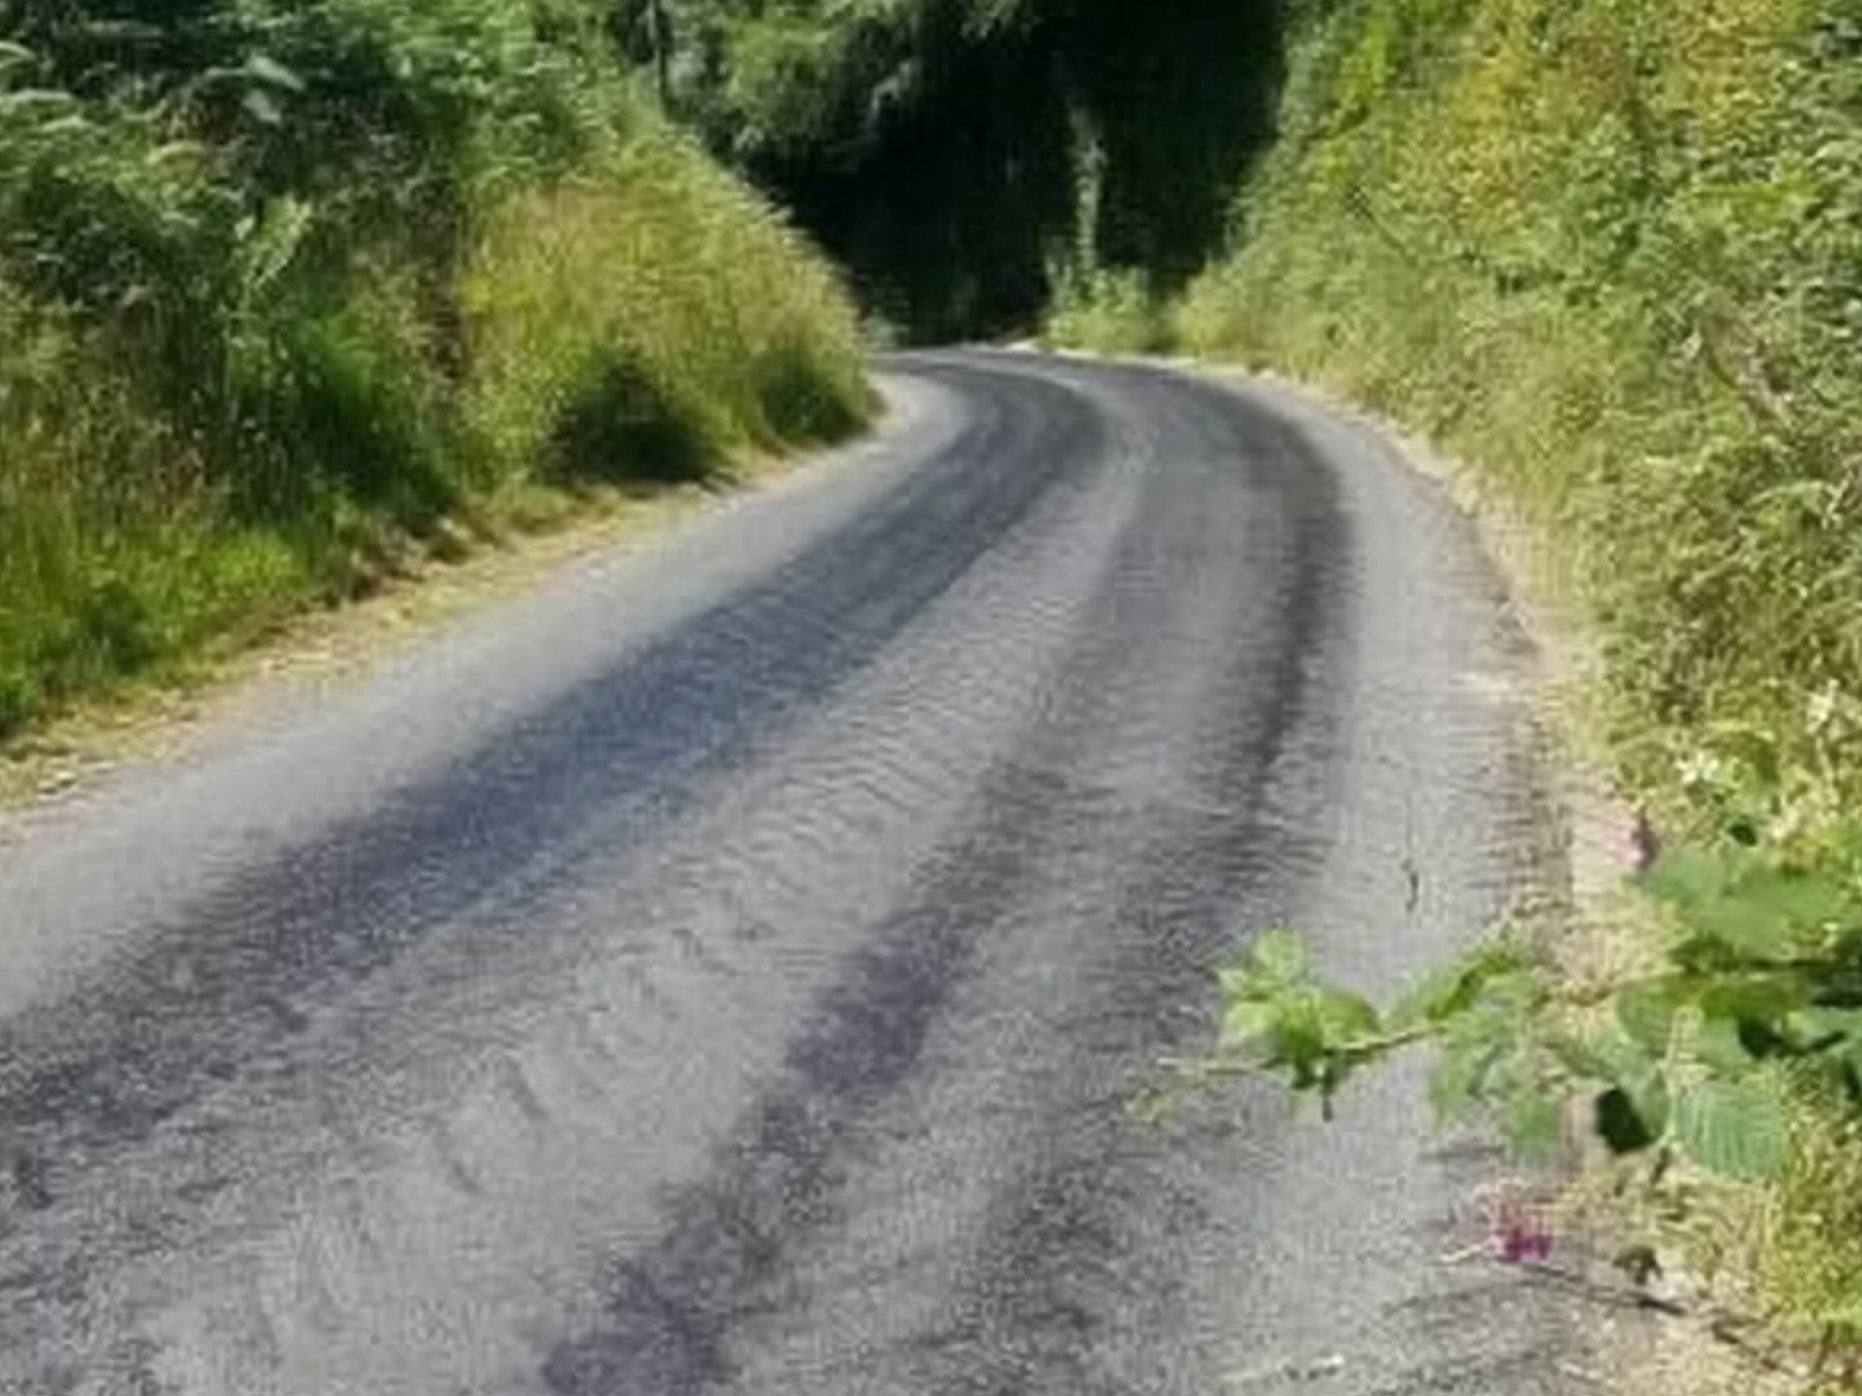 The road from Heasley Mill, near North Molton, Devon, melted in the heat (CWU / SWNS.com)